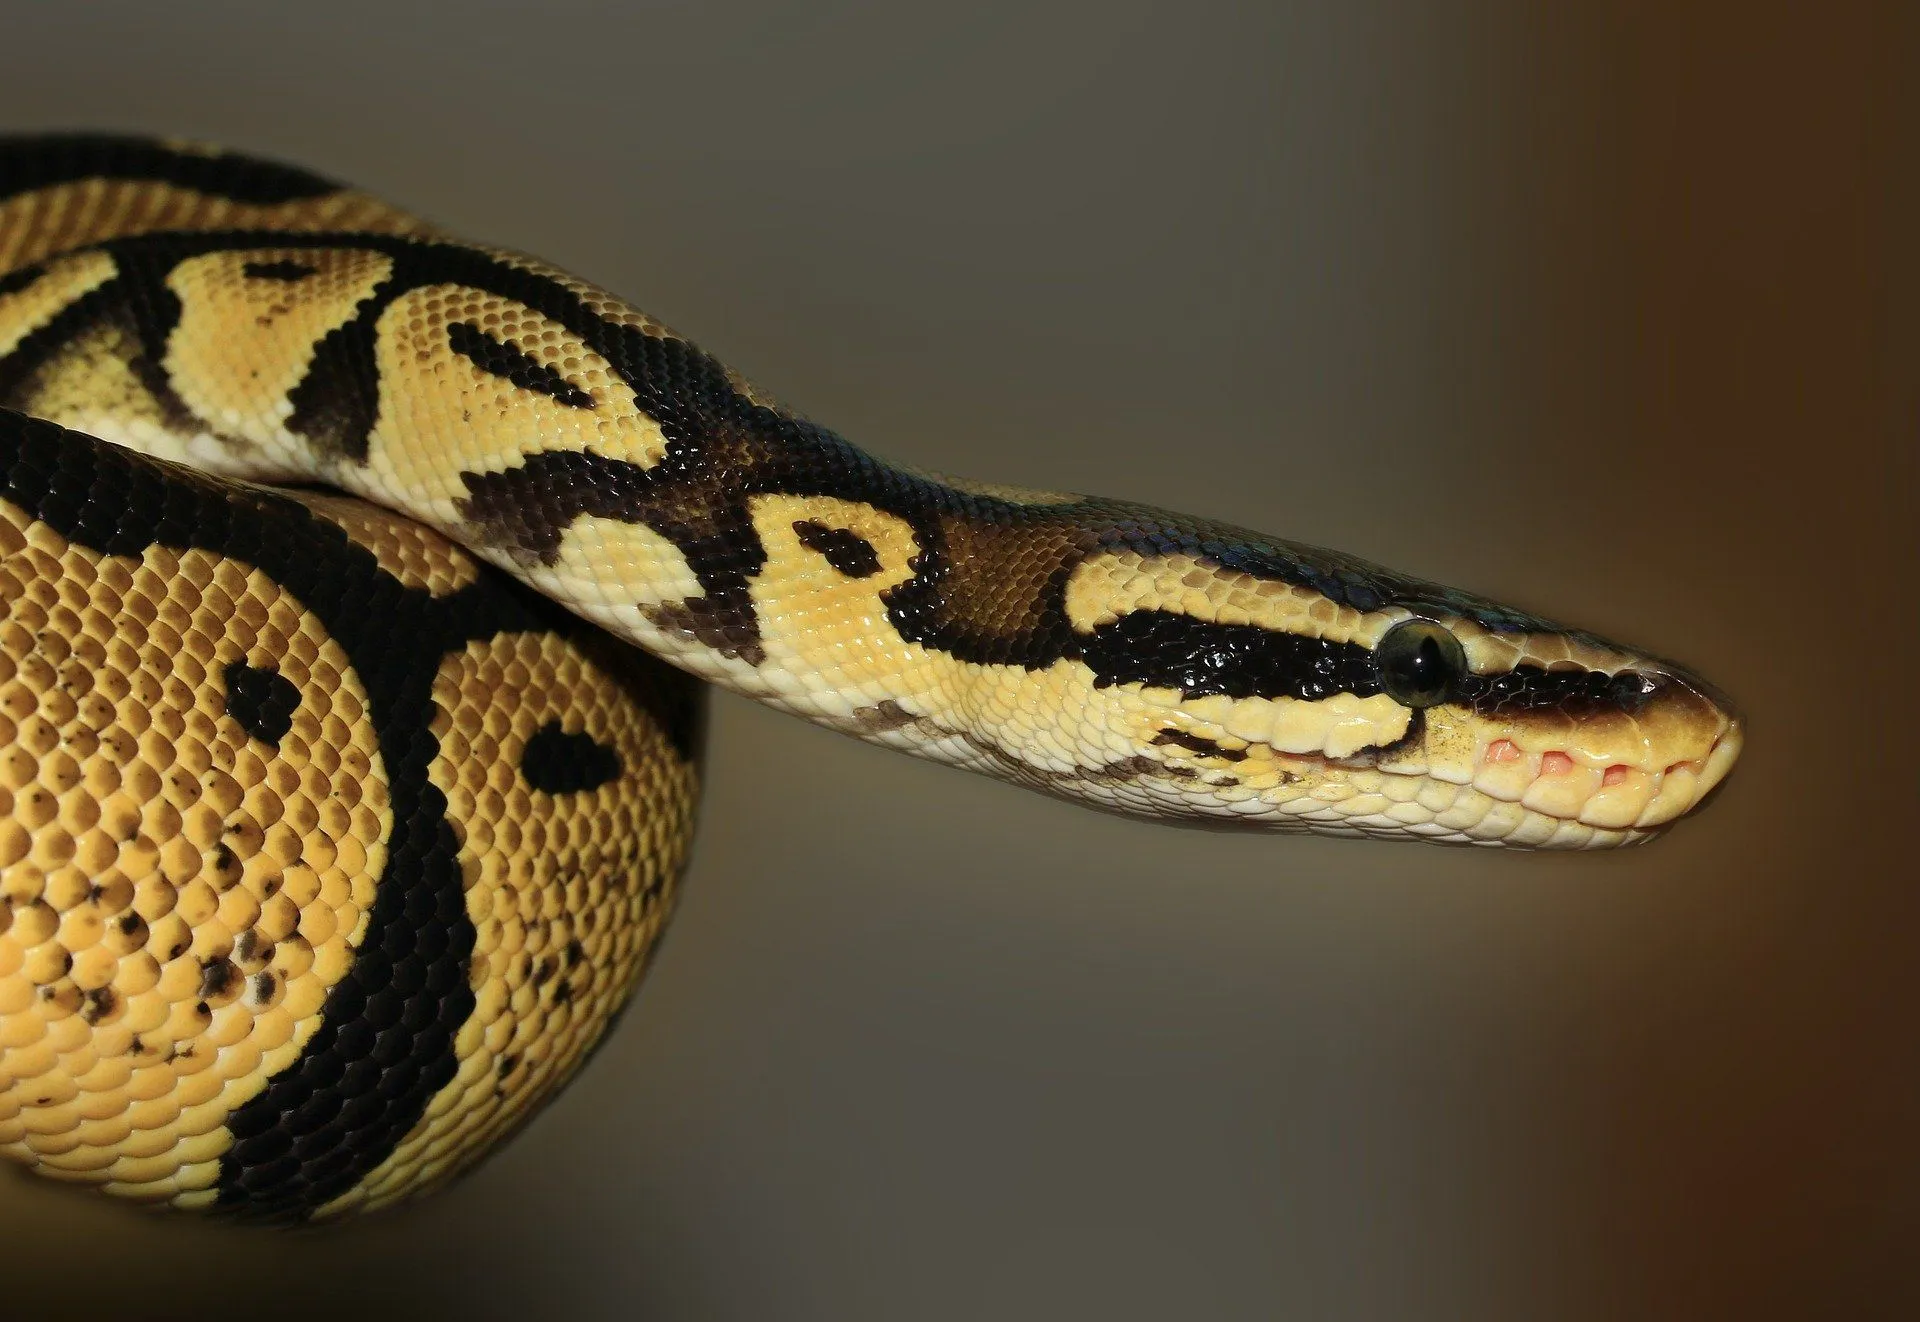 The python is one of the most dangerous species of snakes.